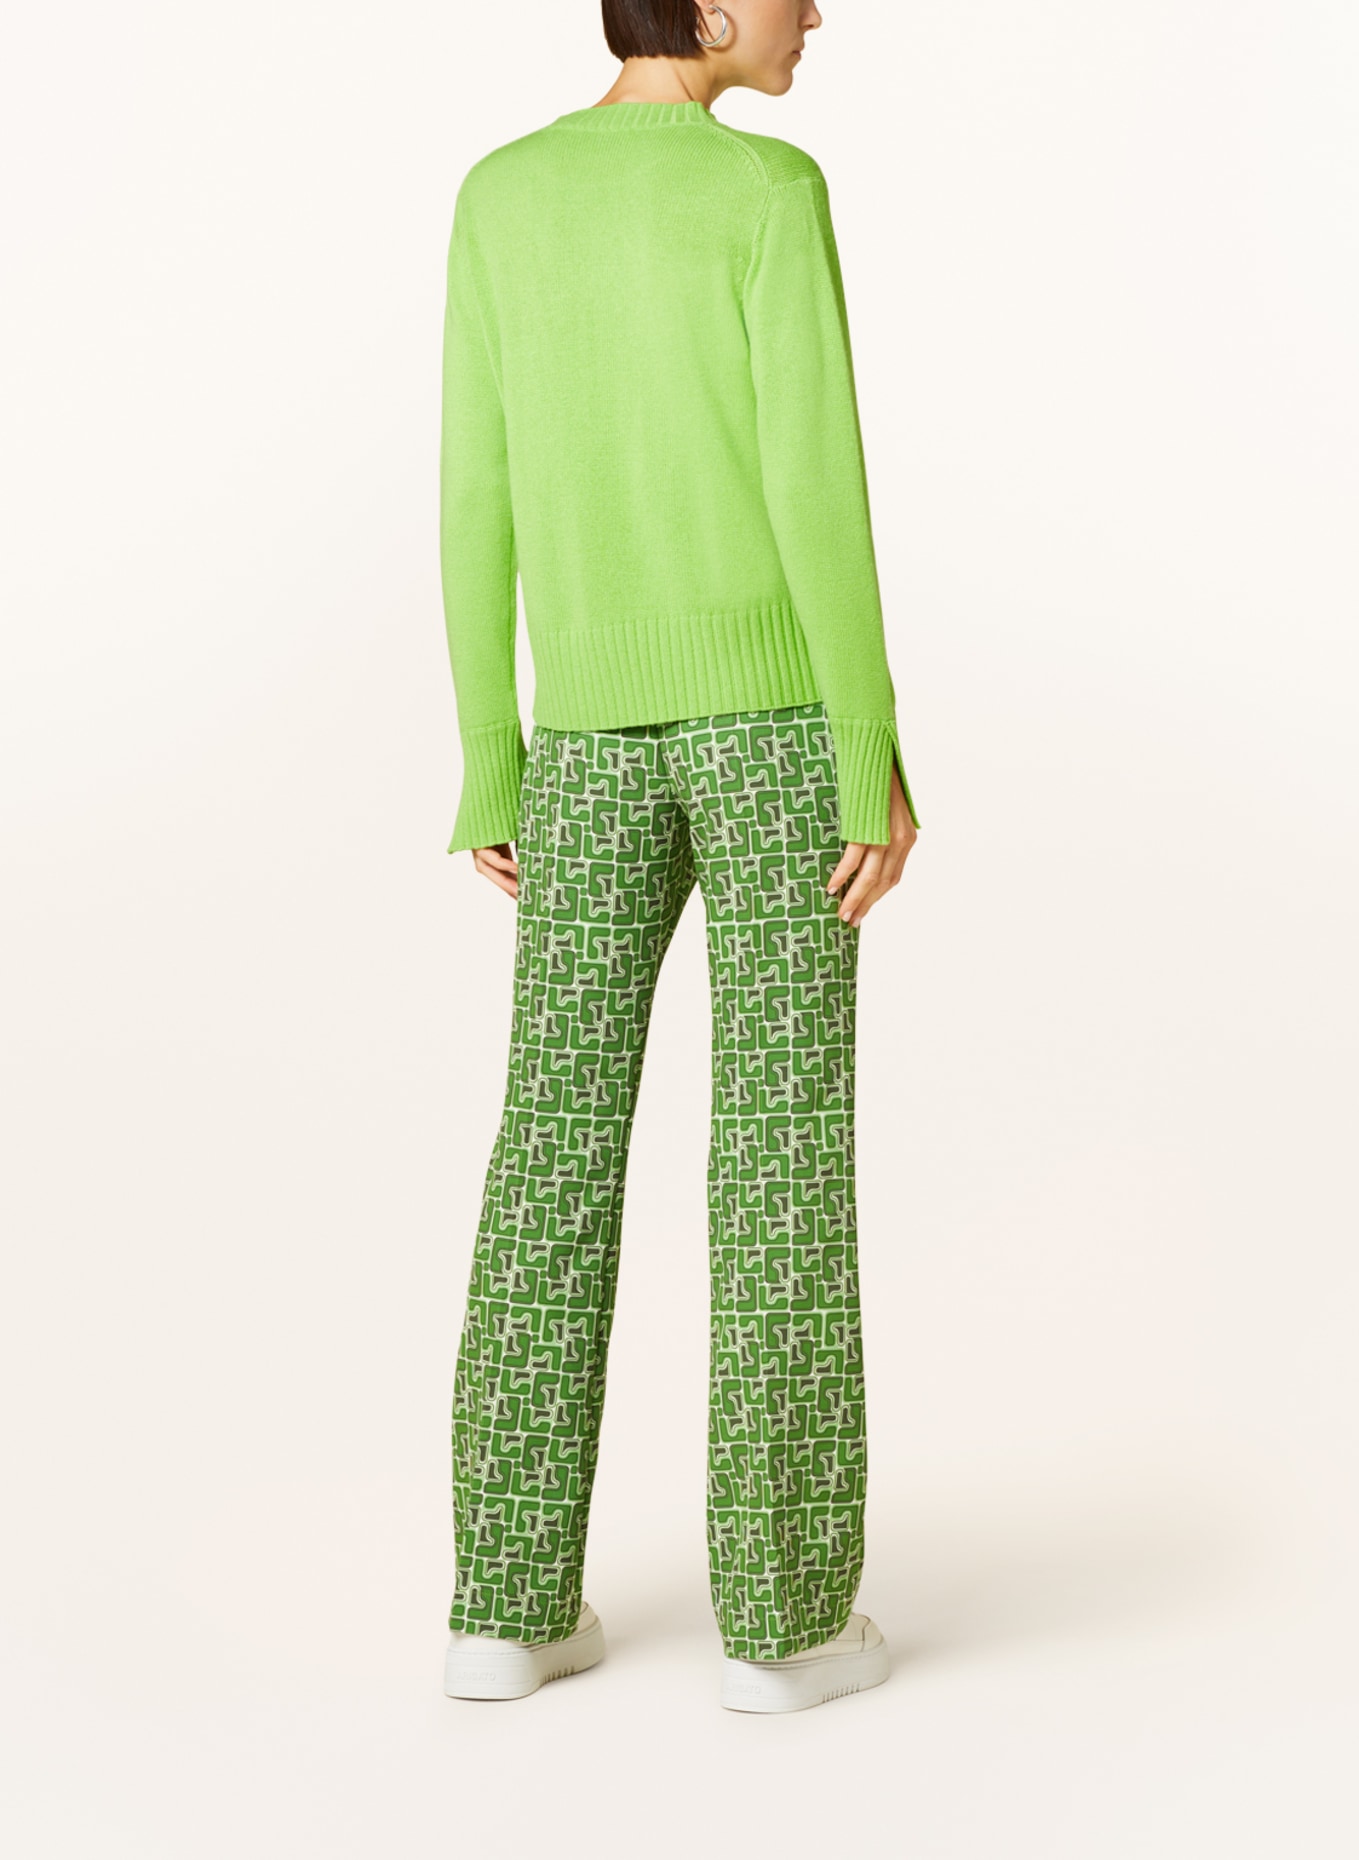 SEM PER LEI Sweater with cashmere, Color: LIGHT GREEN (Image 3)